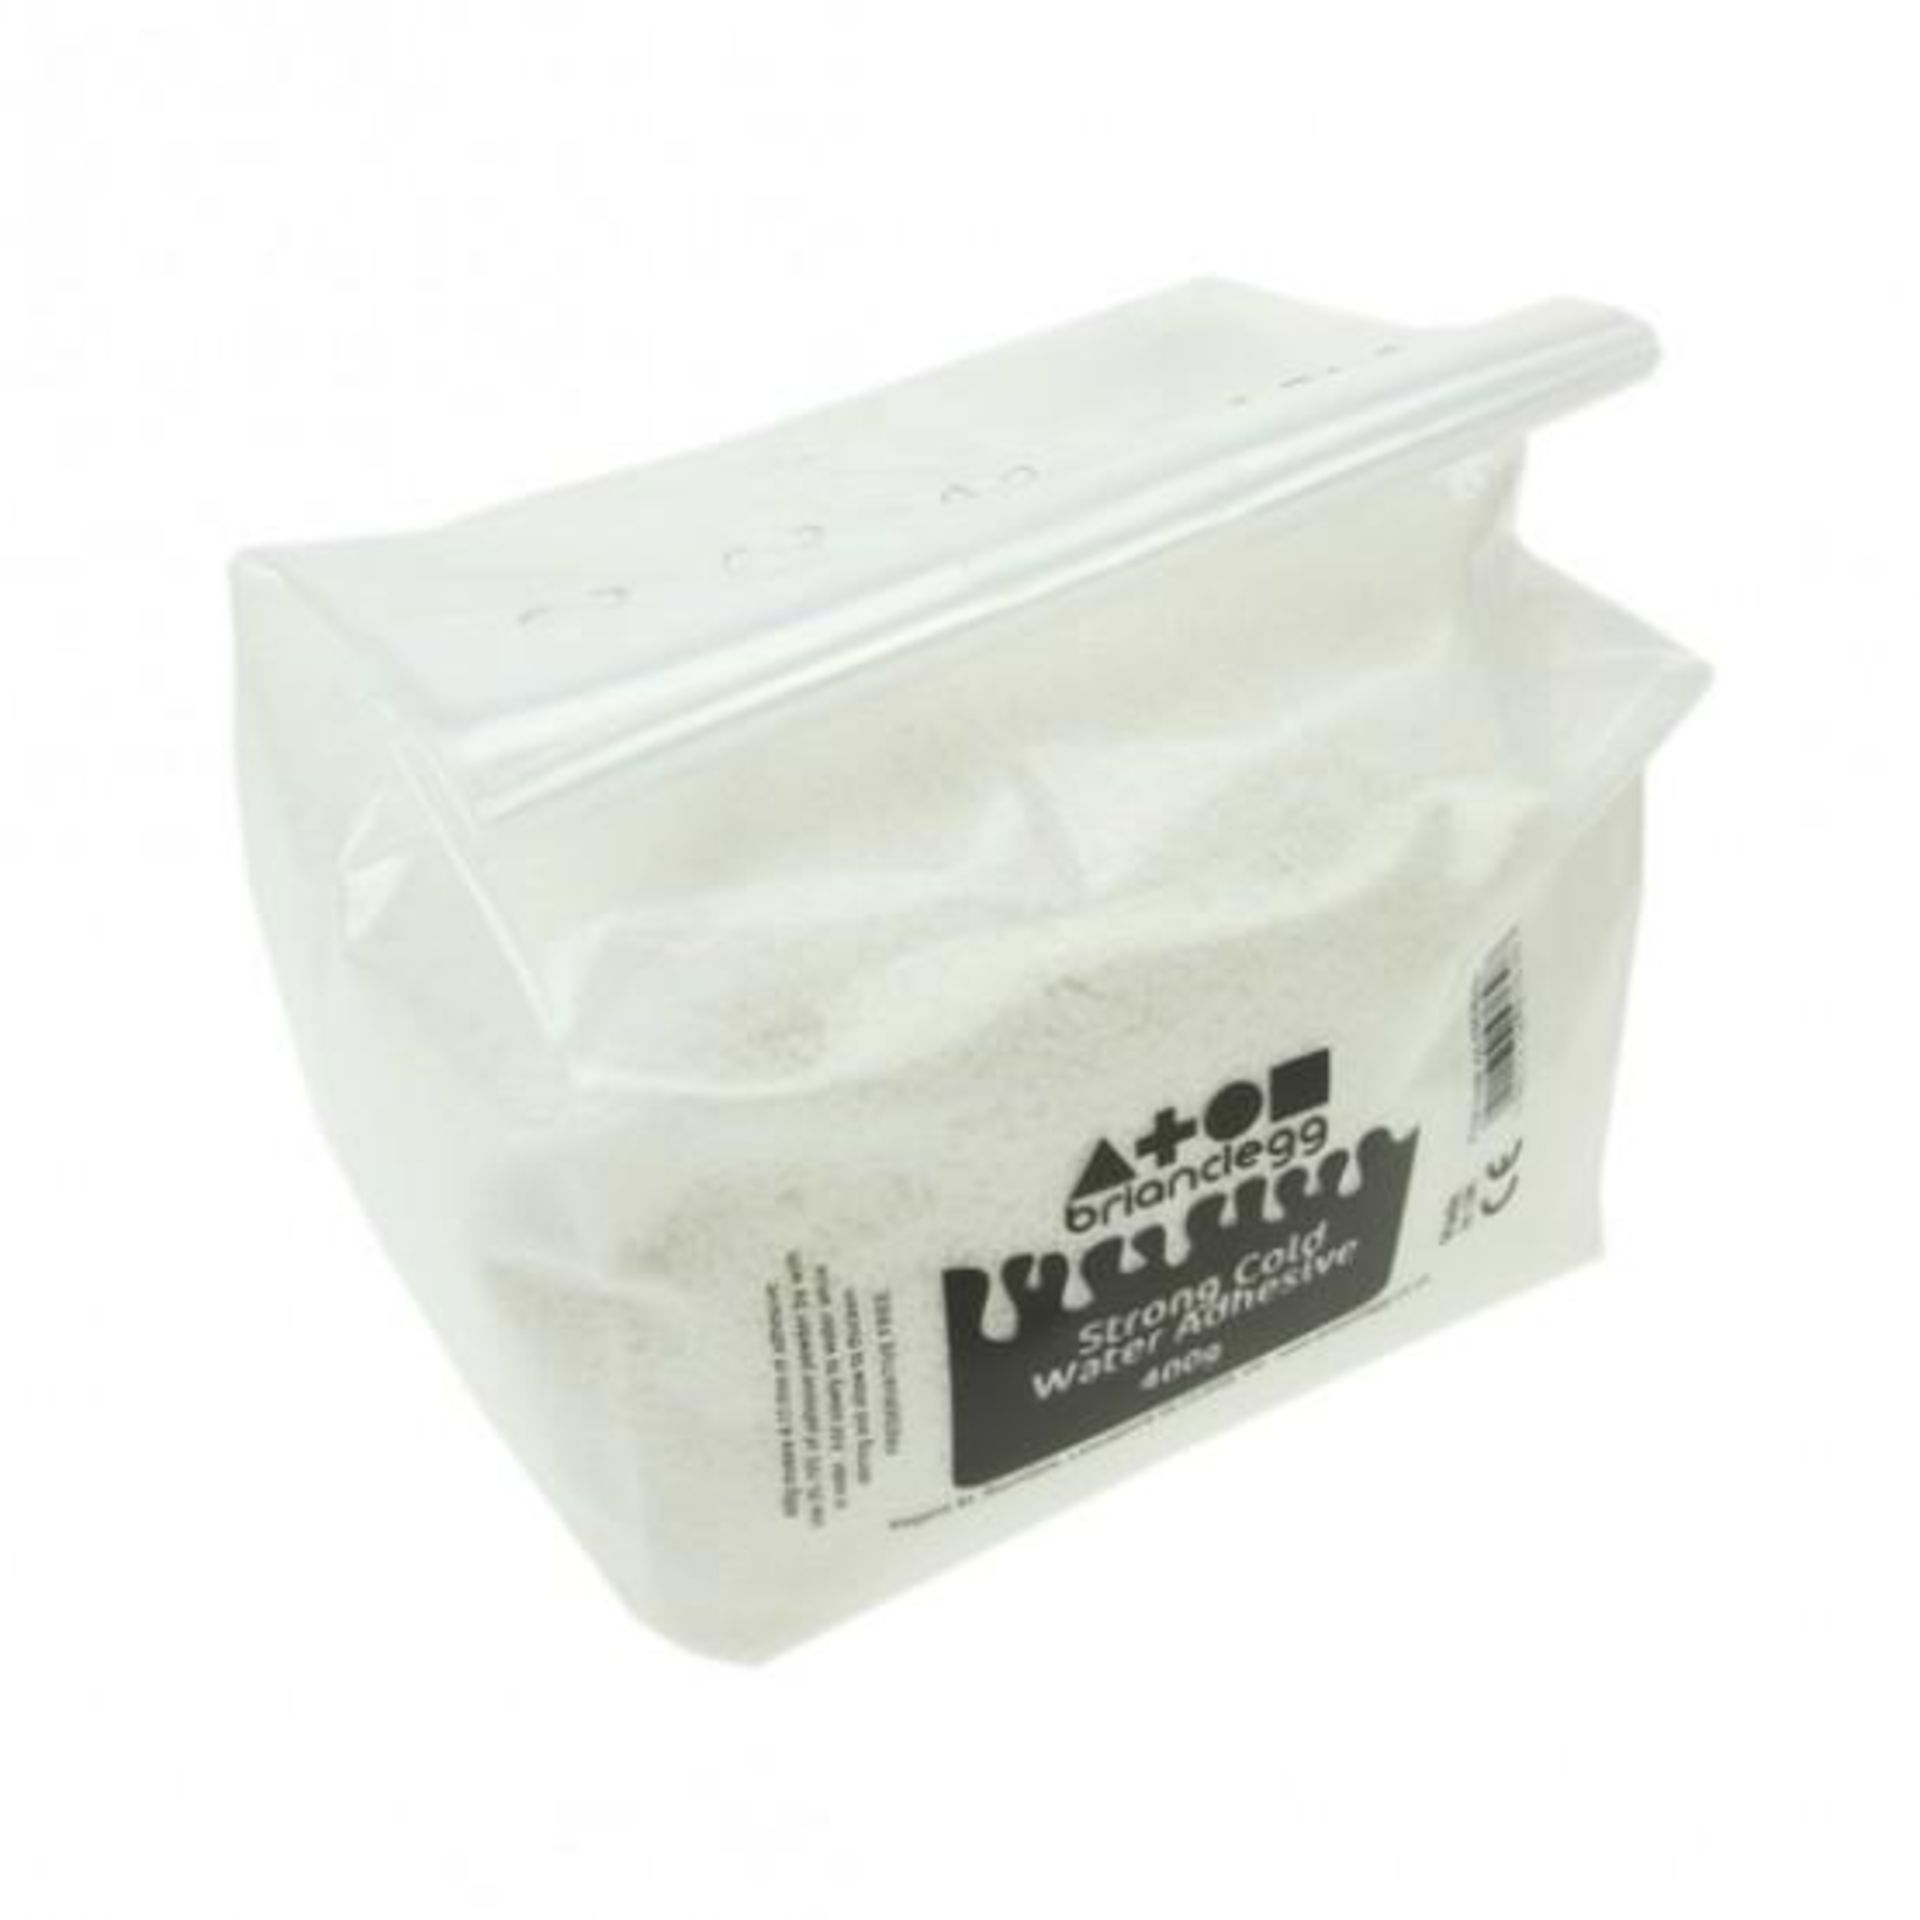 V Brand New Approx 70 400g Bags Pack Of Brian Clegg Strong Cold-Water Adhesive Ideal For School/Home - Image 2 of 2